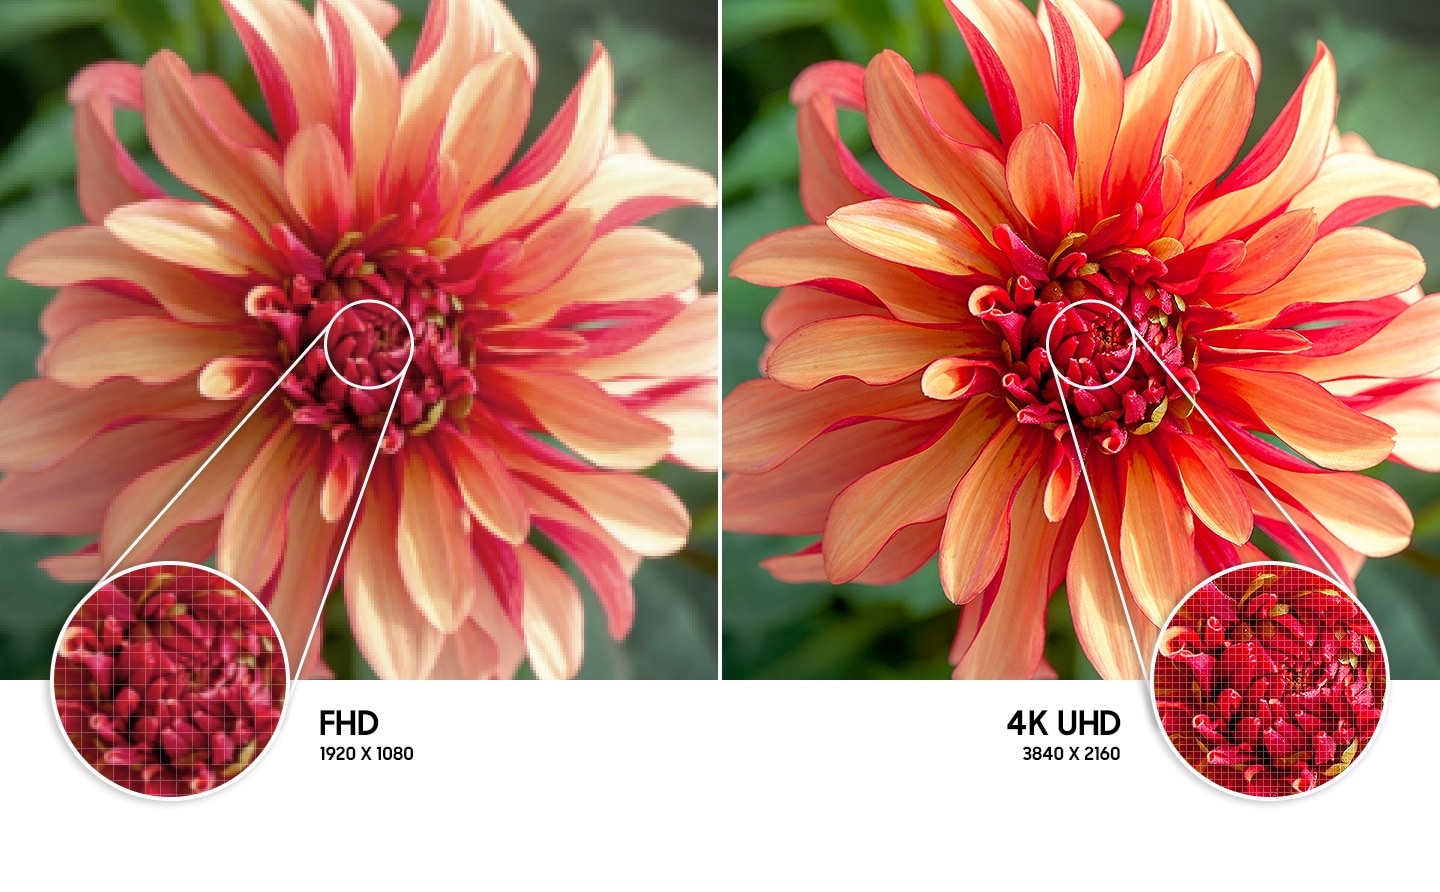 Feel the realism of the picture with 4K UHD resolution